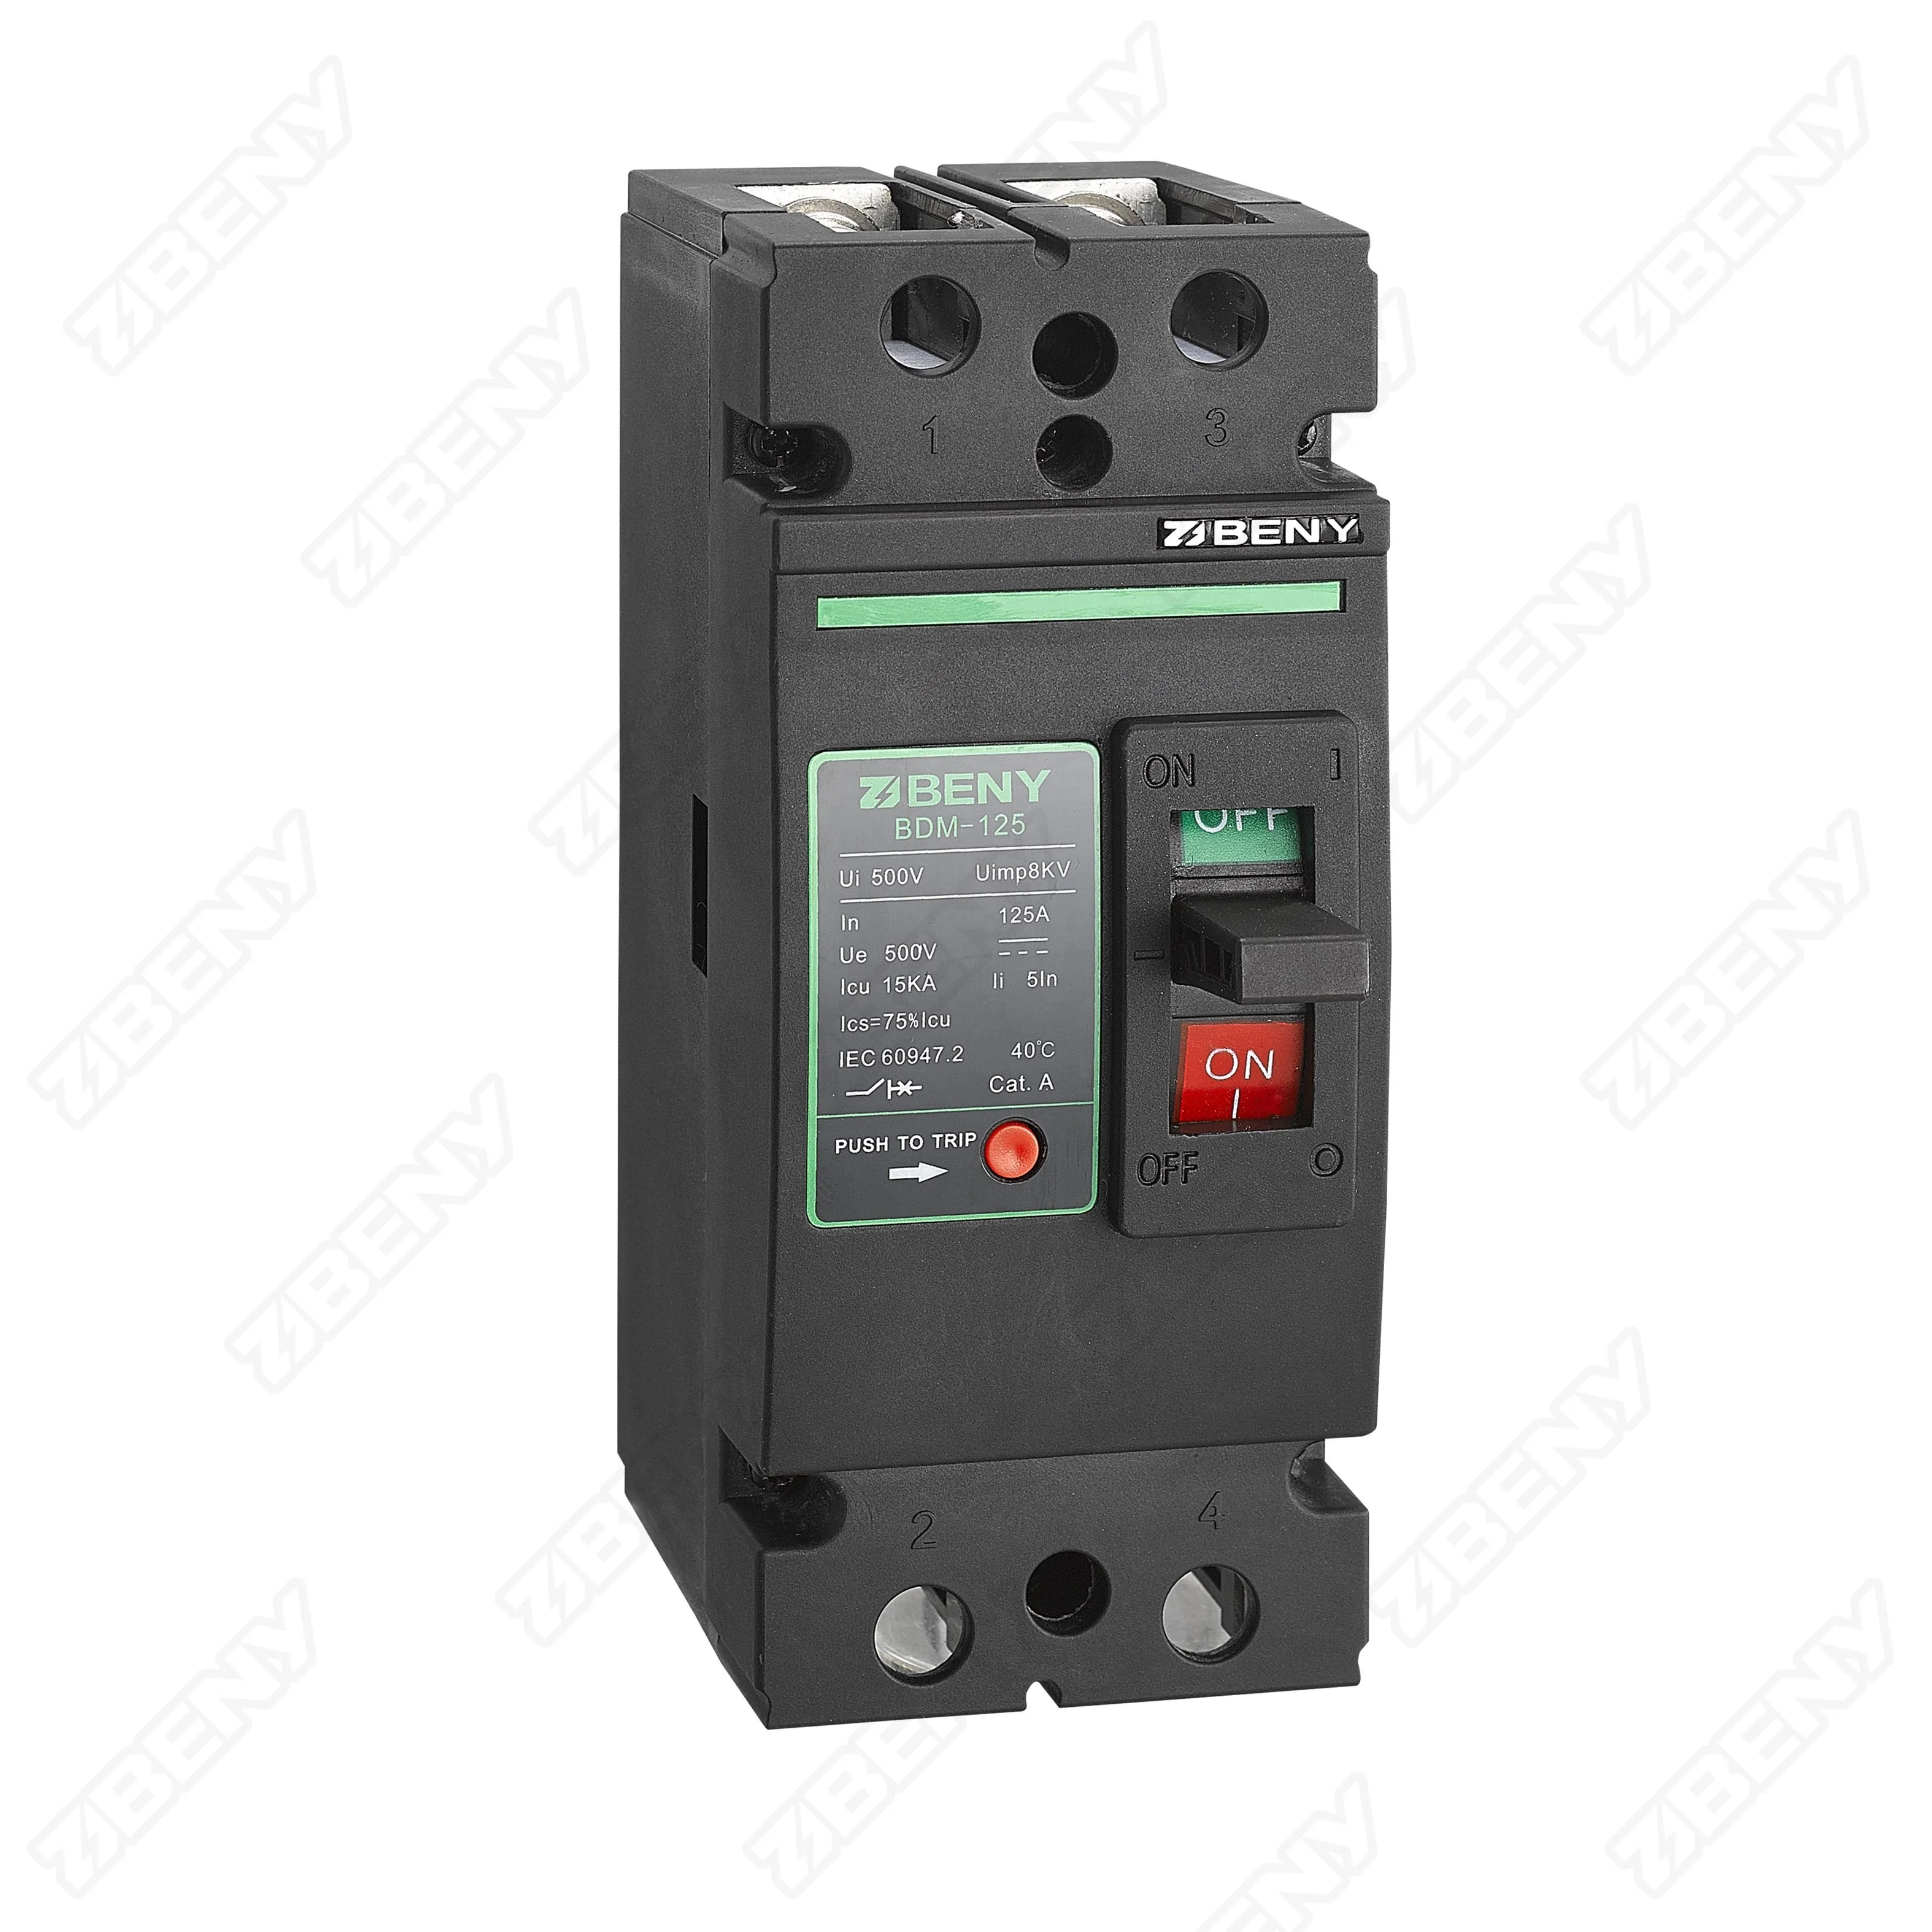 

2P 500V 65A 80A 100A 125A True DC Circuit Breaker for Solar Panels and Battery